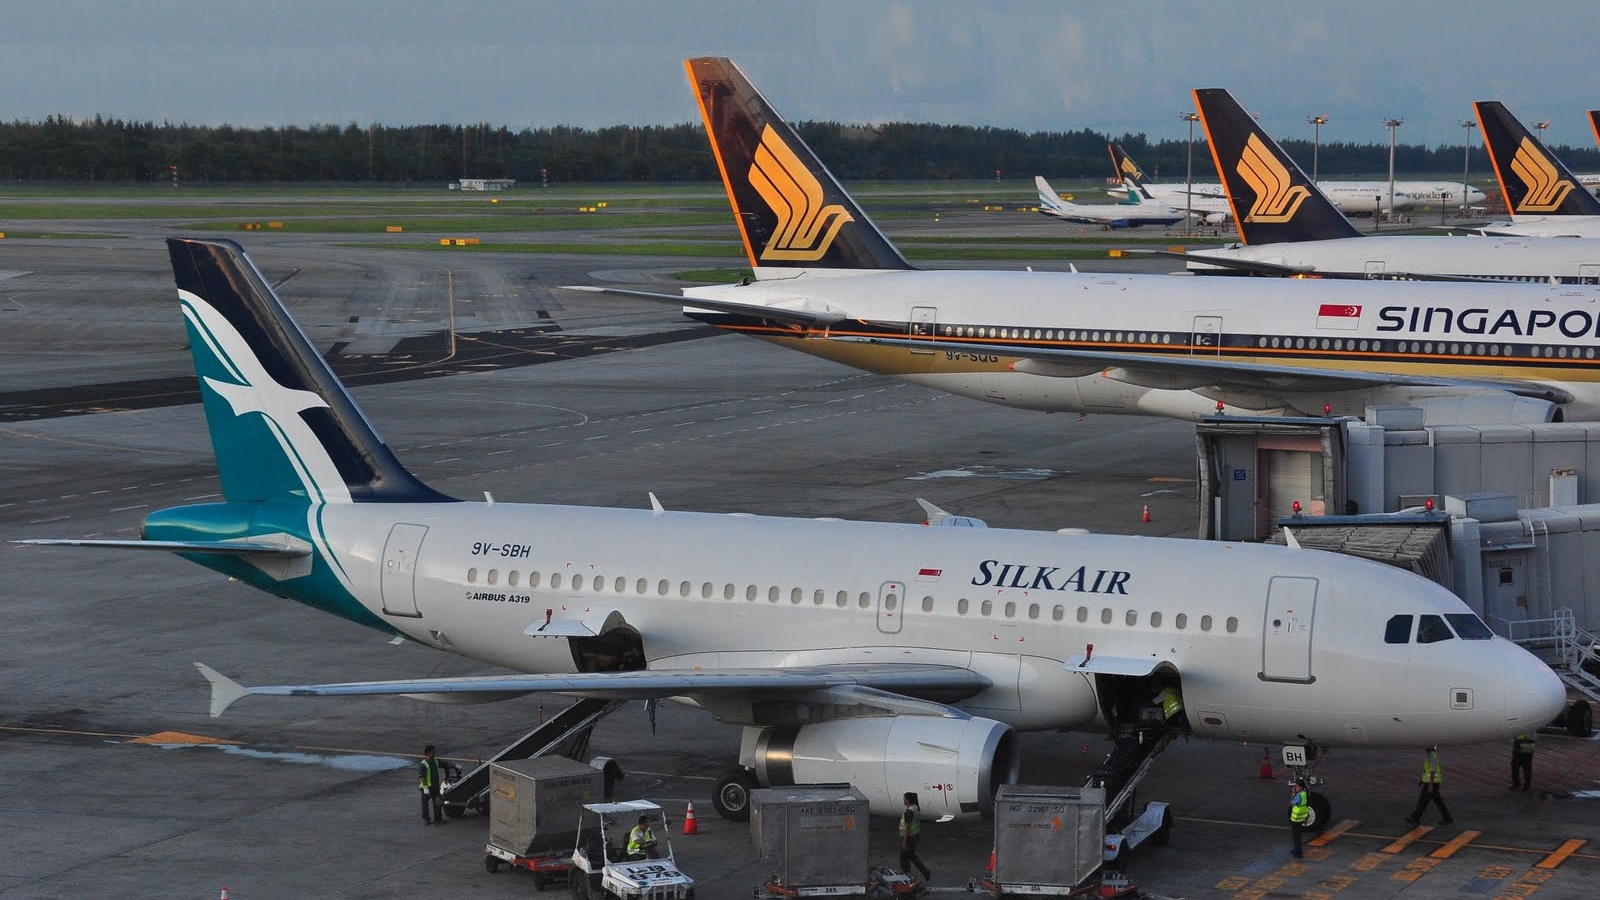 SilkAir Singapore Airlines Cropped